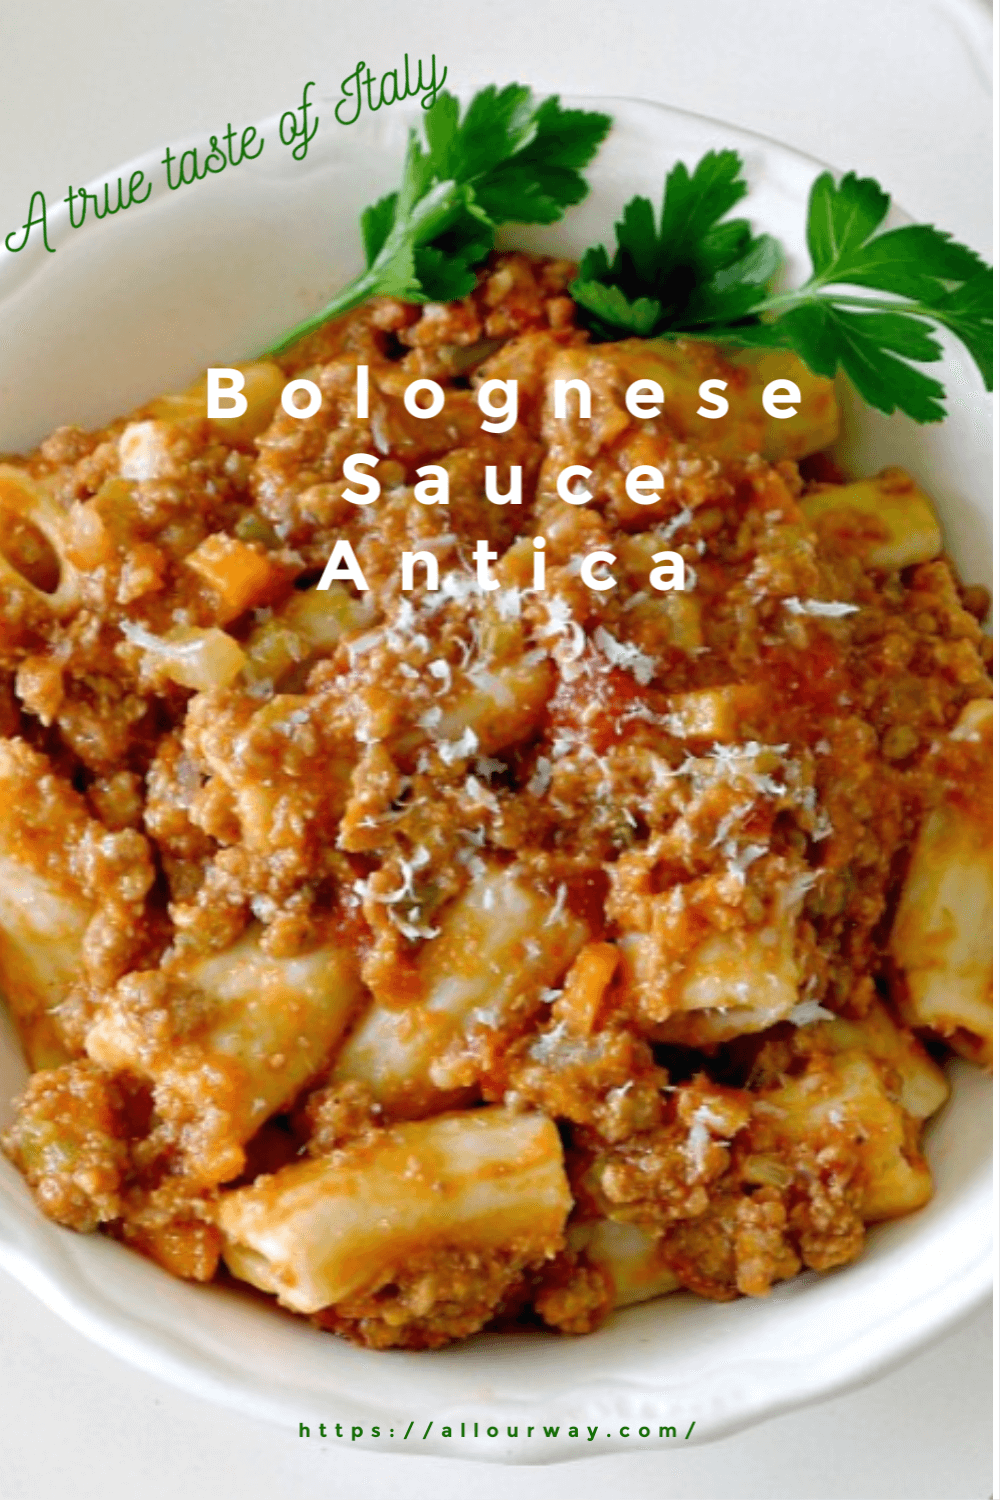 A delicious hearty meat sauce that's made creamy by slow cooking the meat in milk, then wine and finally with plum tomatoes. Smooth and rich a truly memorable dish. This is a classic sauce that gives you a true taste of the finest Italian cuisine. #Bolognese Sauce, #classicItaliansauce, #italiancuisine, #italianragù, #pastameatsauce, #Bolognesesauceantica, #spaghettimeatsauce, #traditionalmeatsauce #sugodicarne